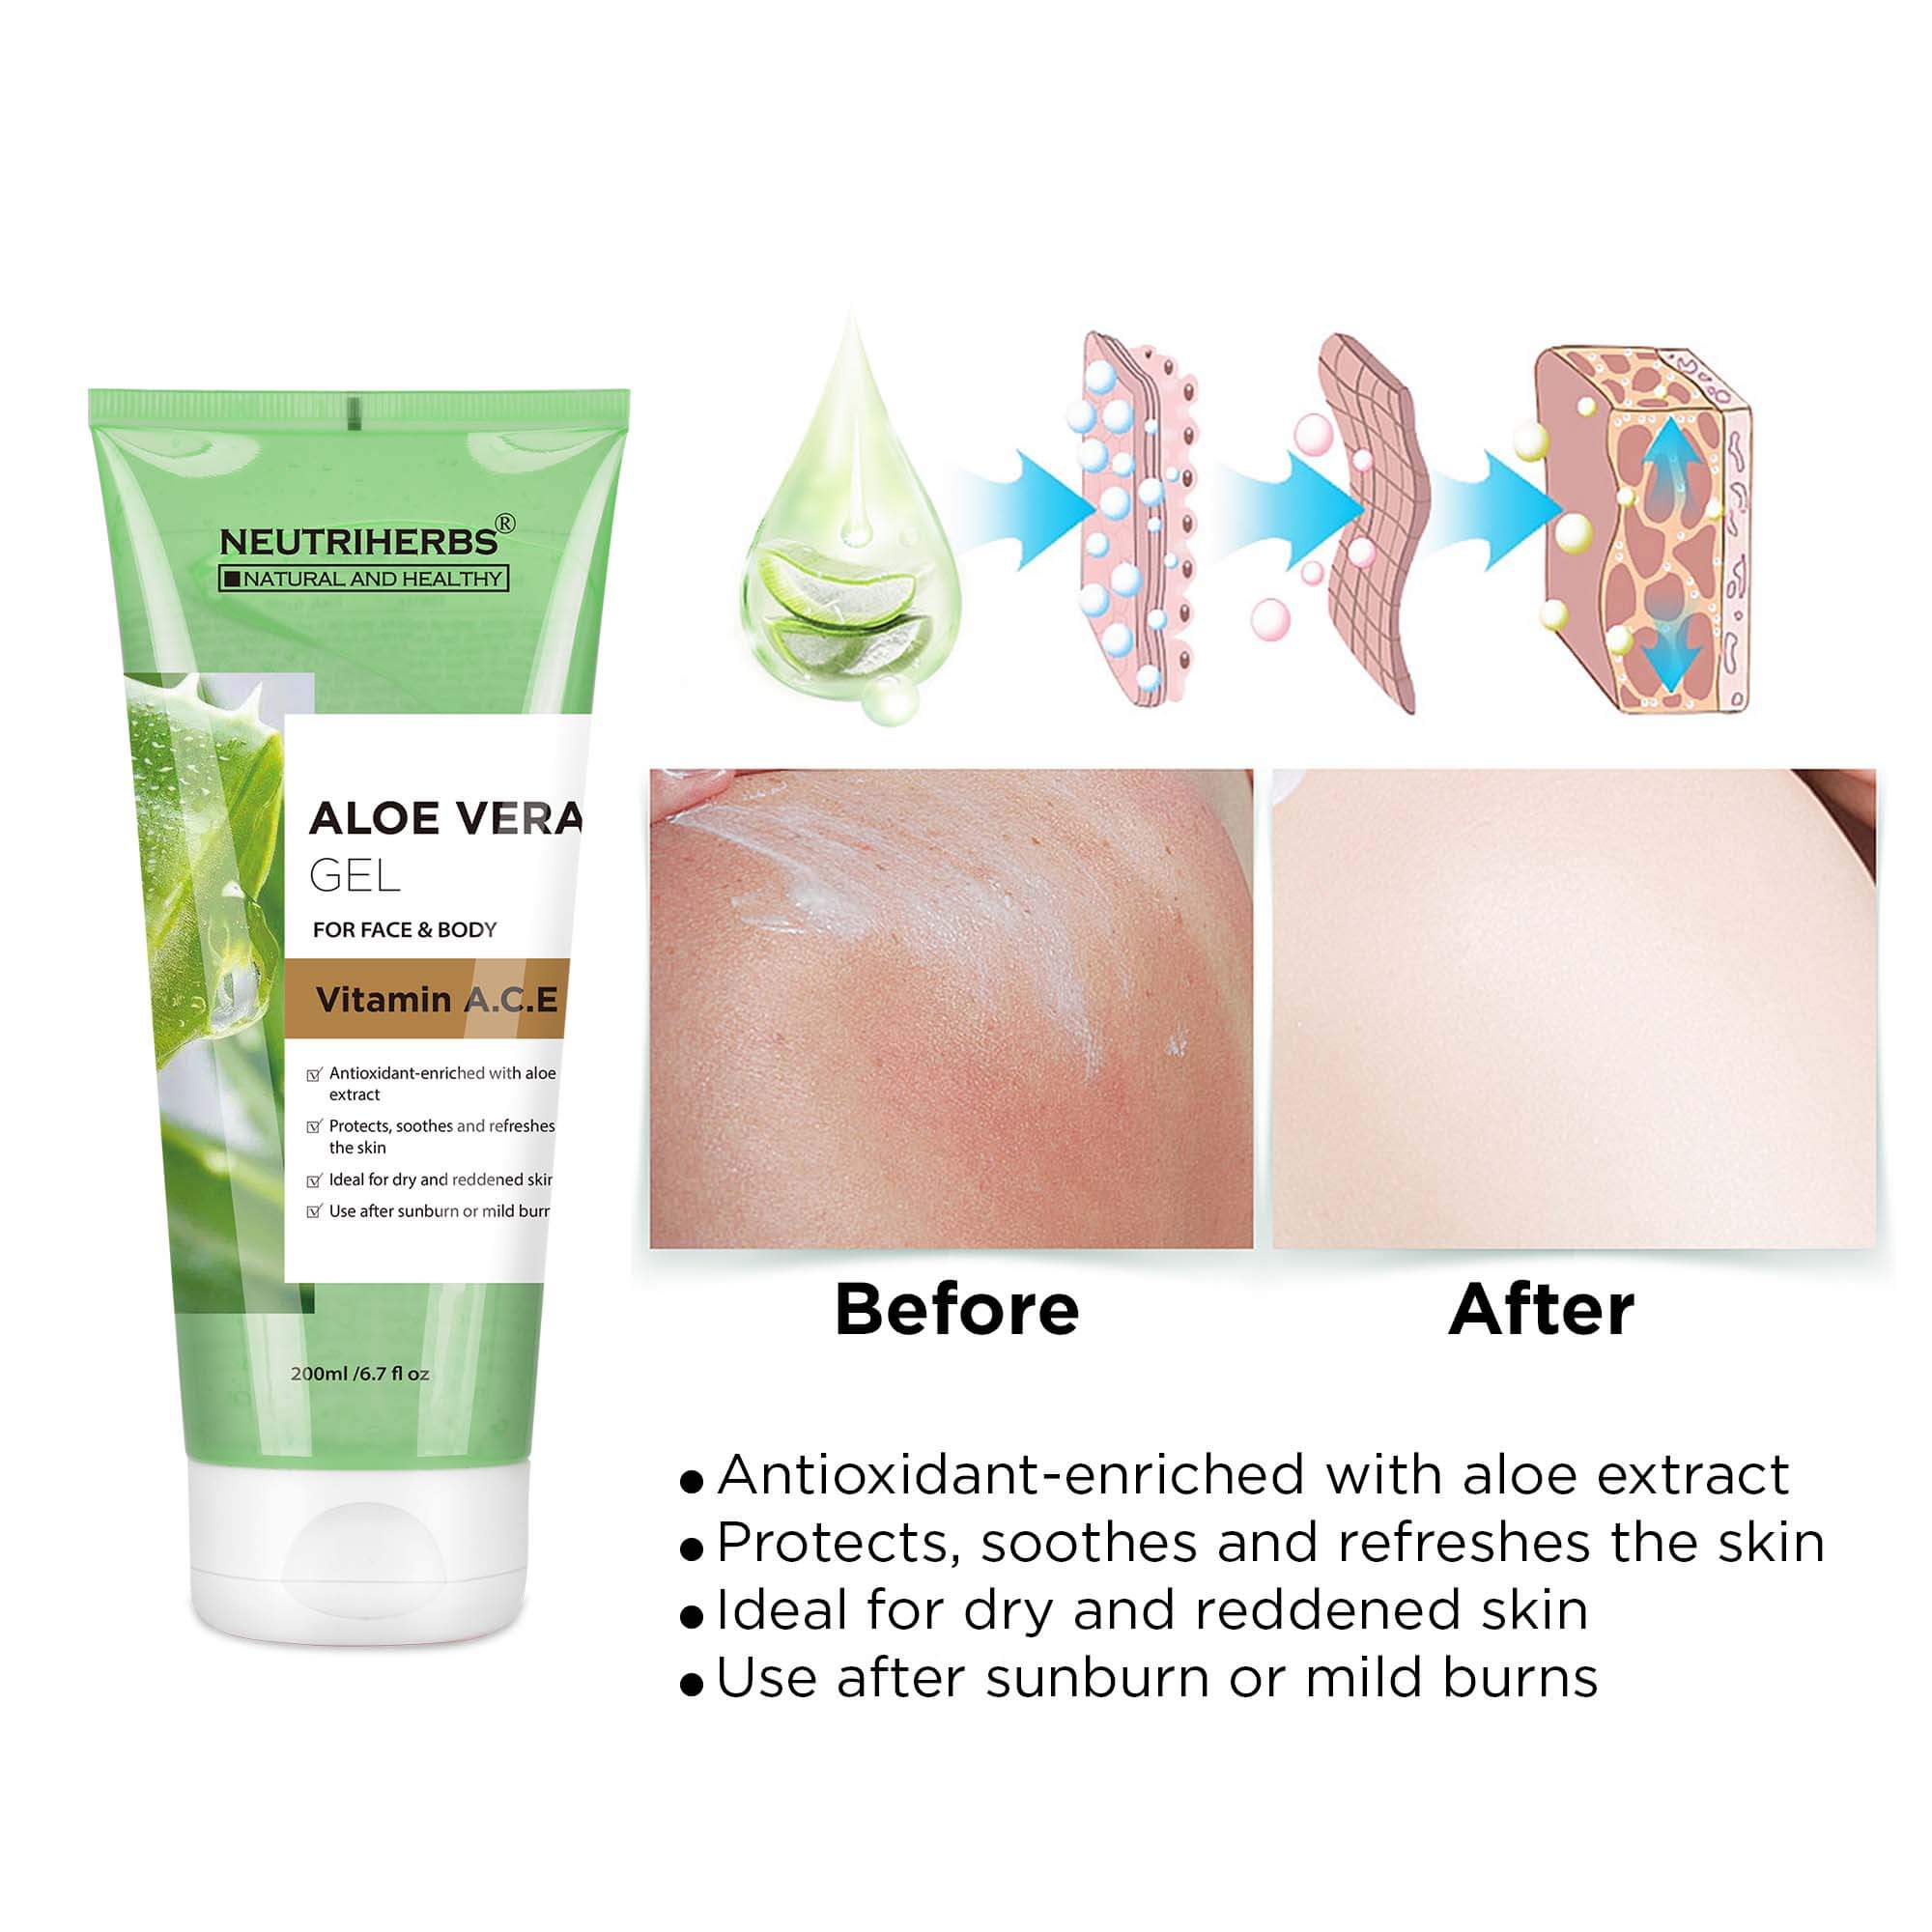 before and after use of Aloe Vera Gel